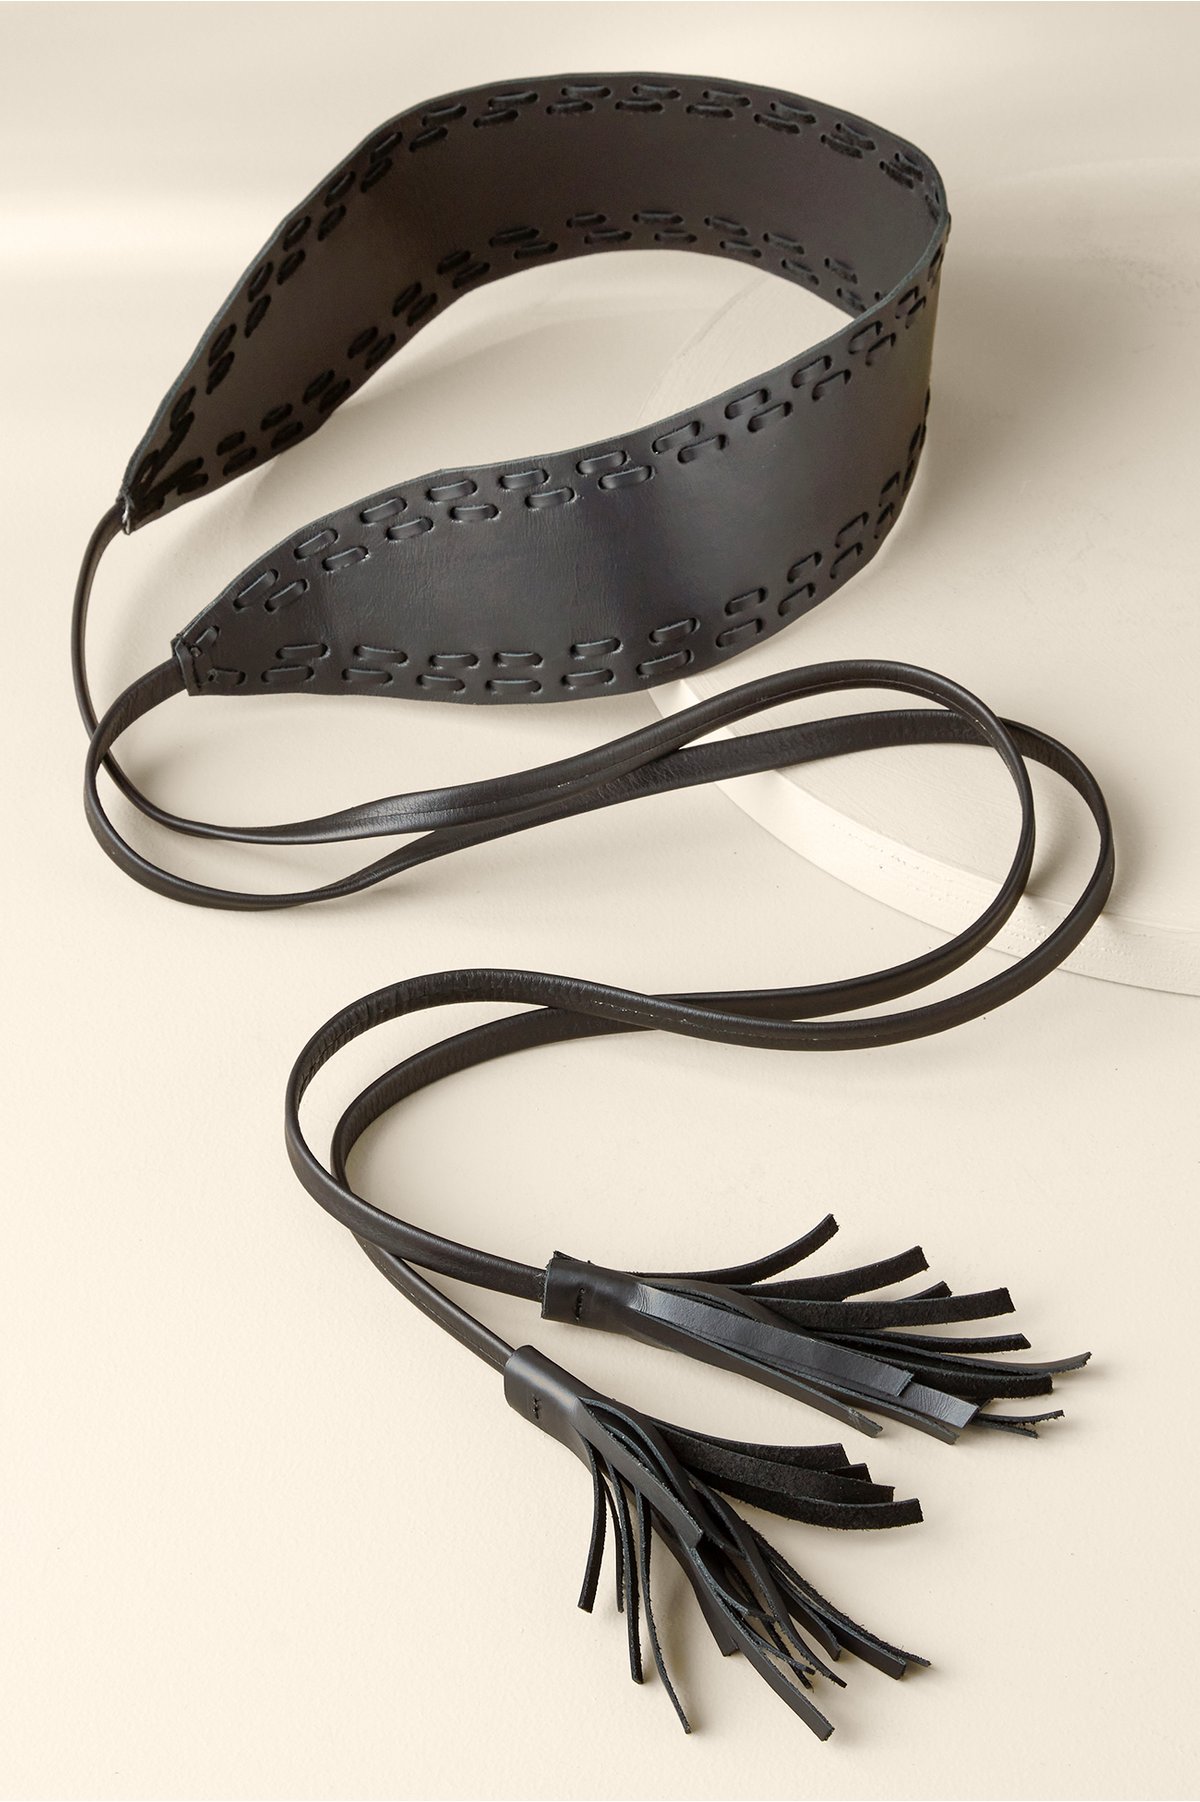 Irena Whipstitch Belt by Soft Surroundings, in Bla...